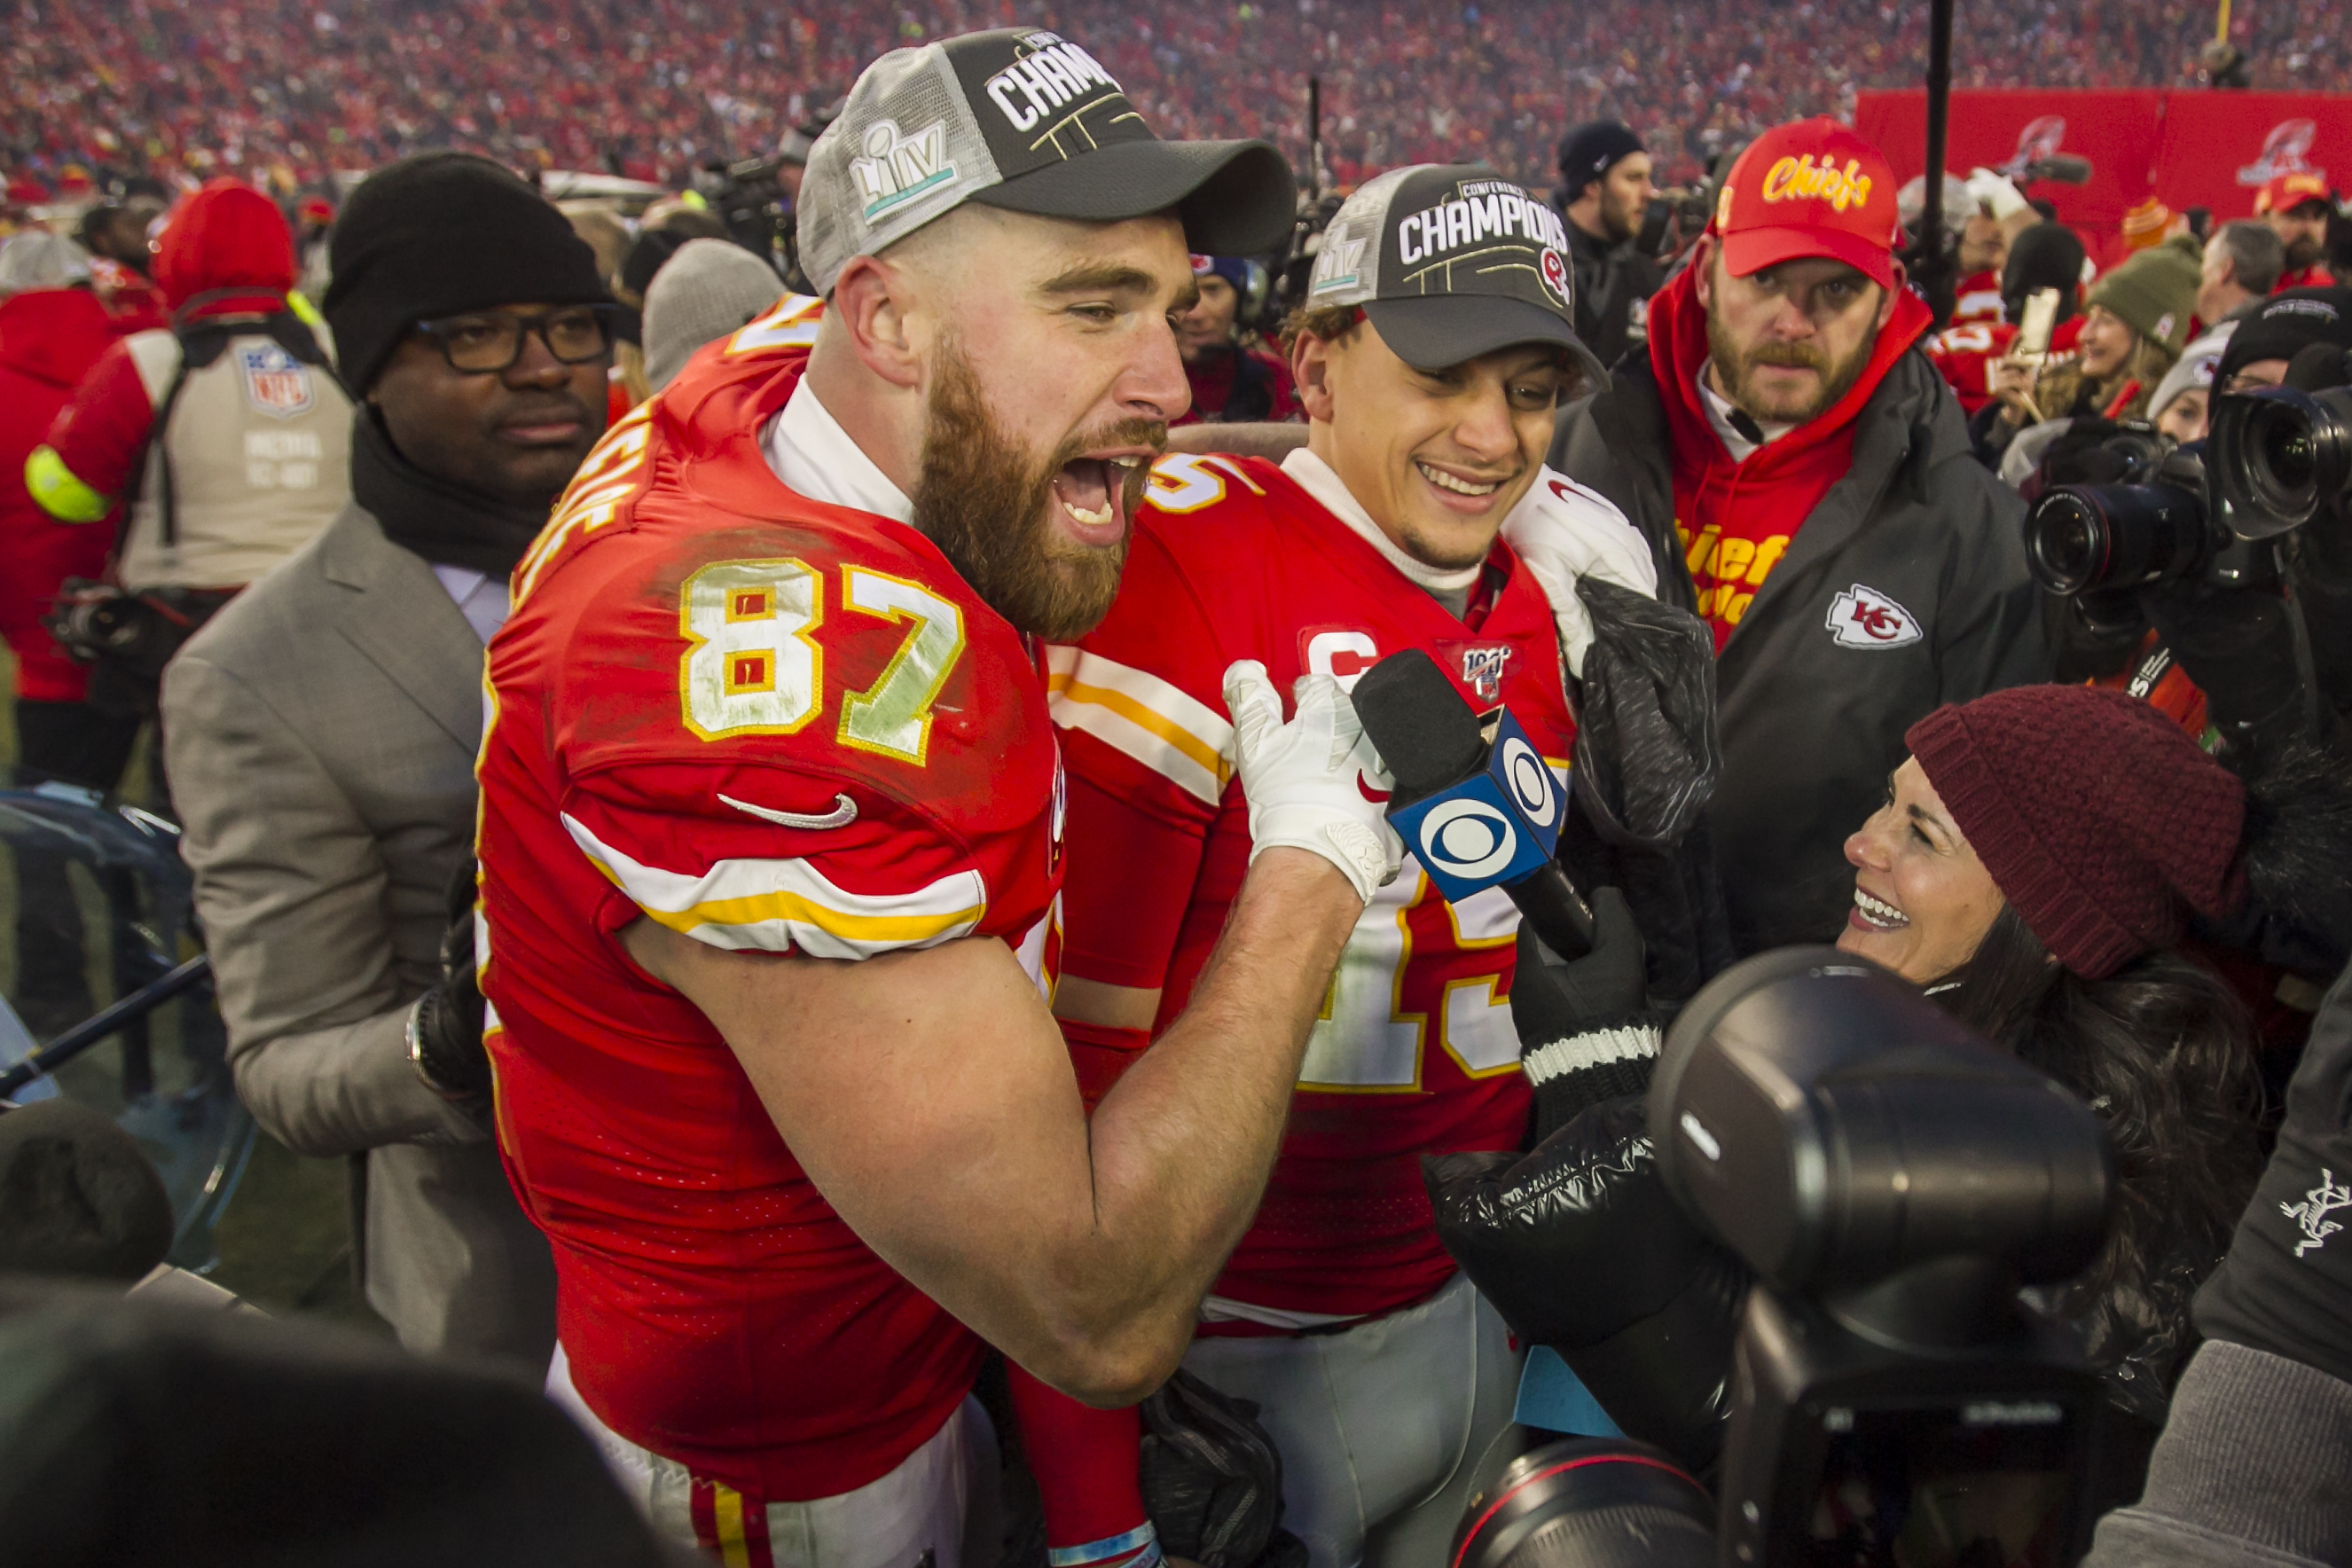 Travis Kelce Dropped An FBomb On Live TV, Gets Extremely Hyped During